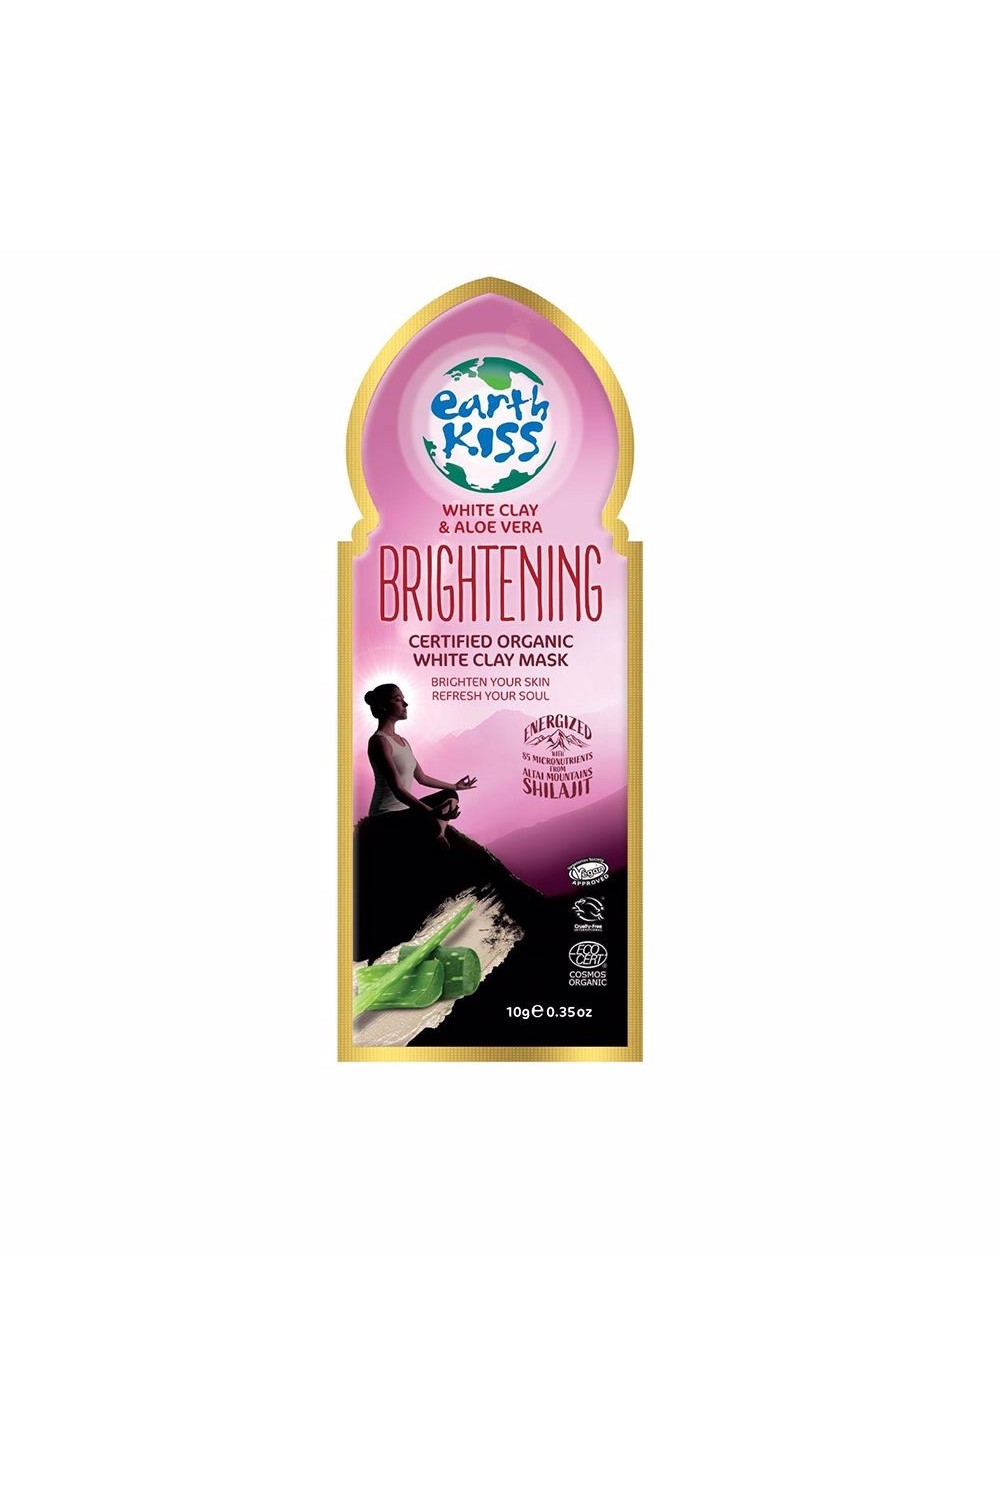 Earth Kiss Brightening Certified Organic White Clay Mask 10ml